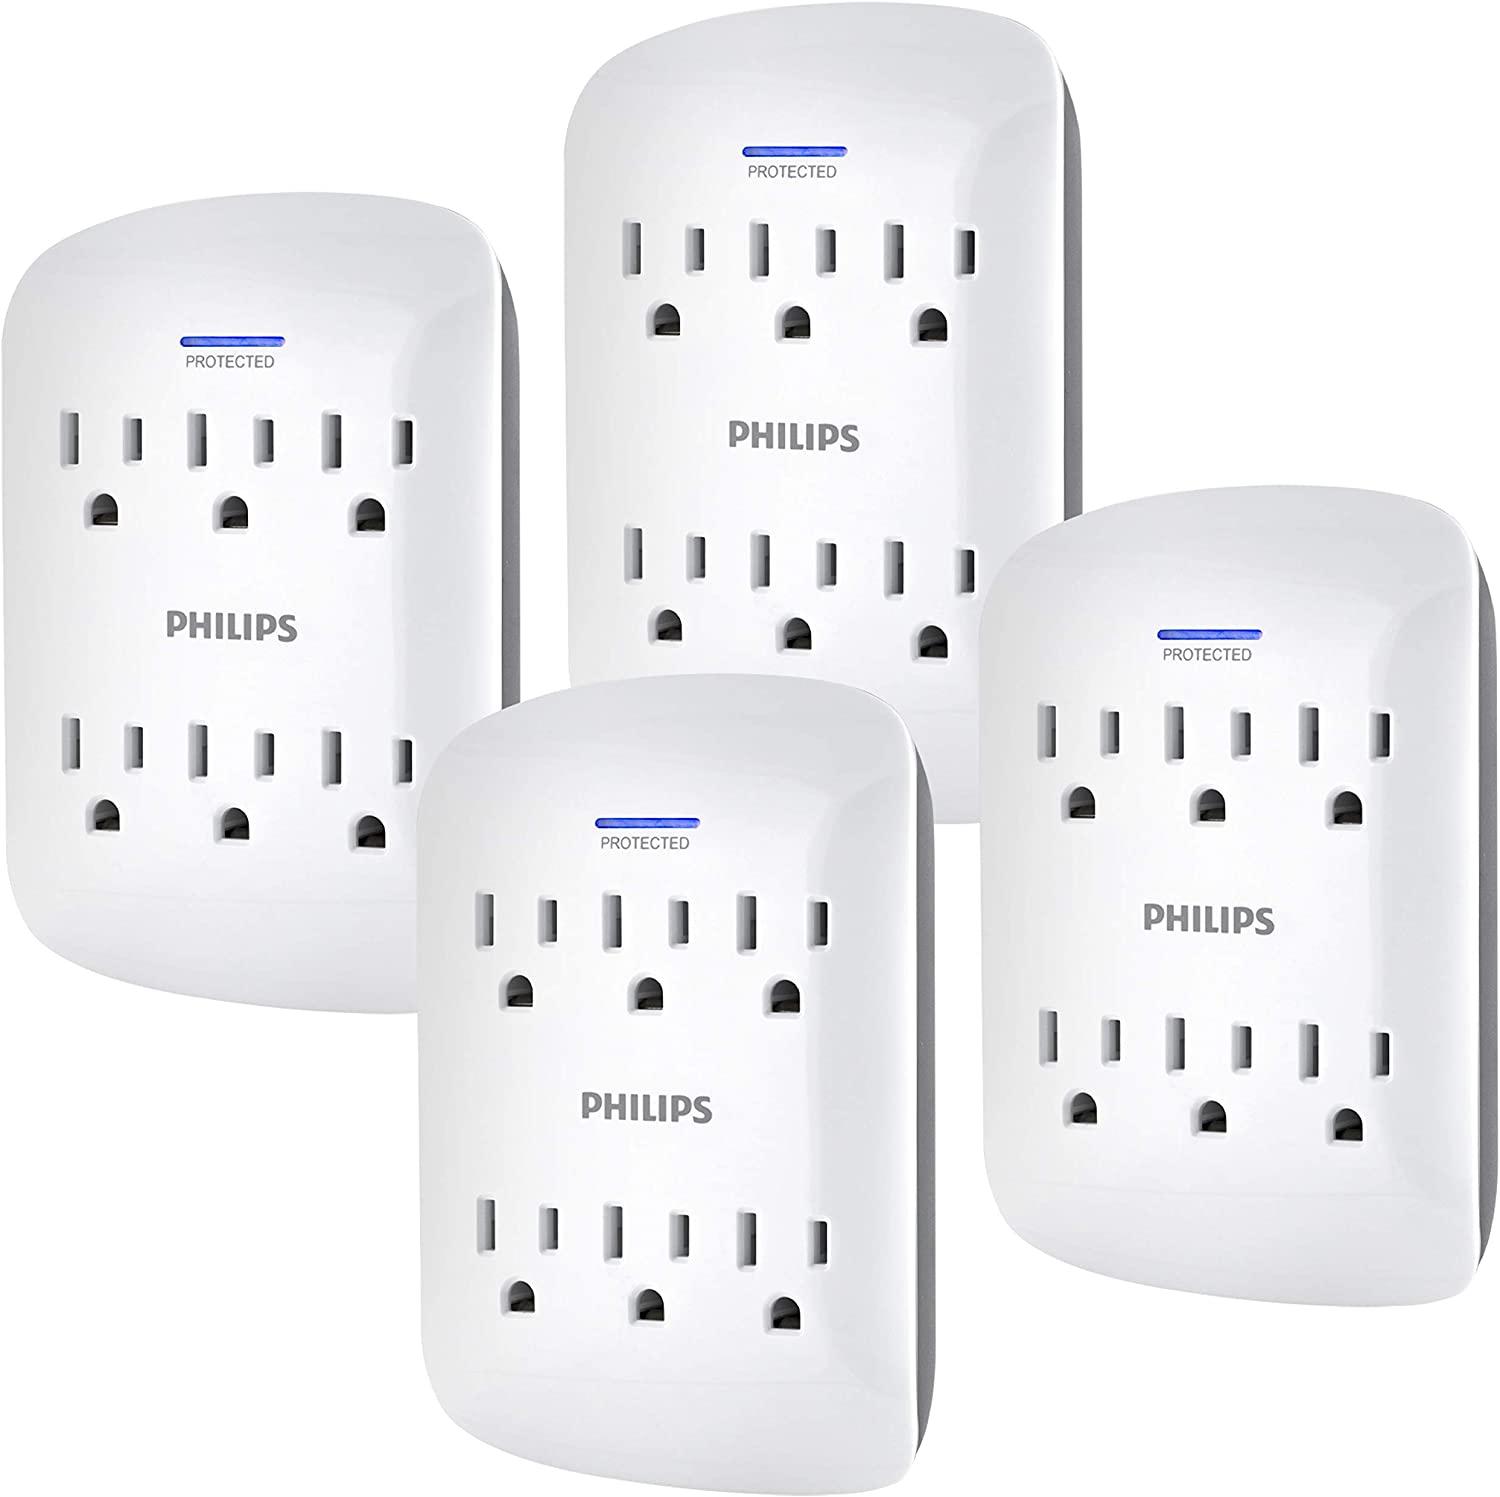 4 Philips 6-Outlet Extender Surge Protectors for $19.99